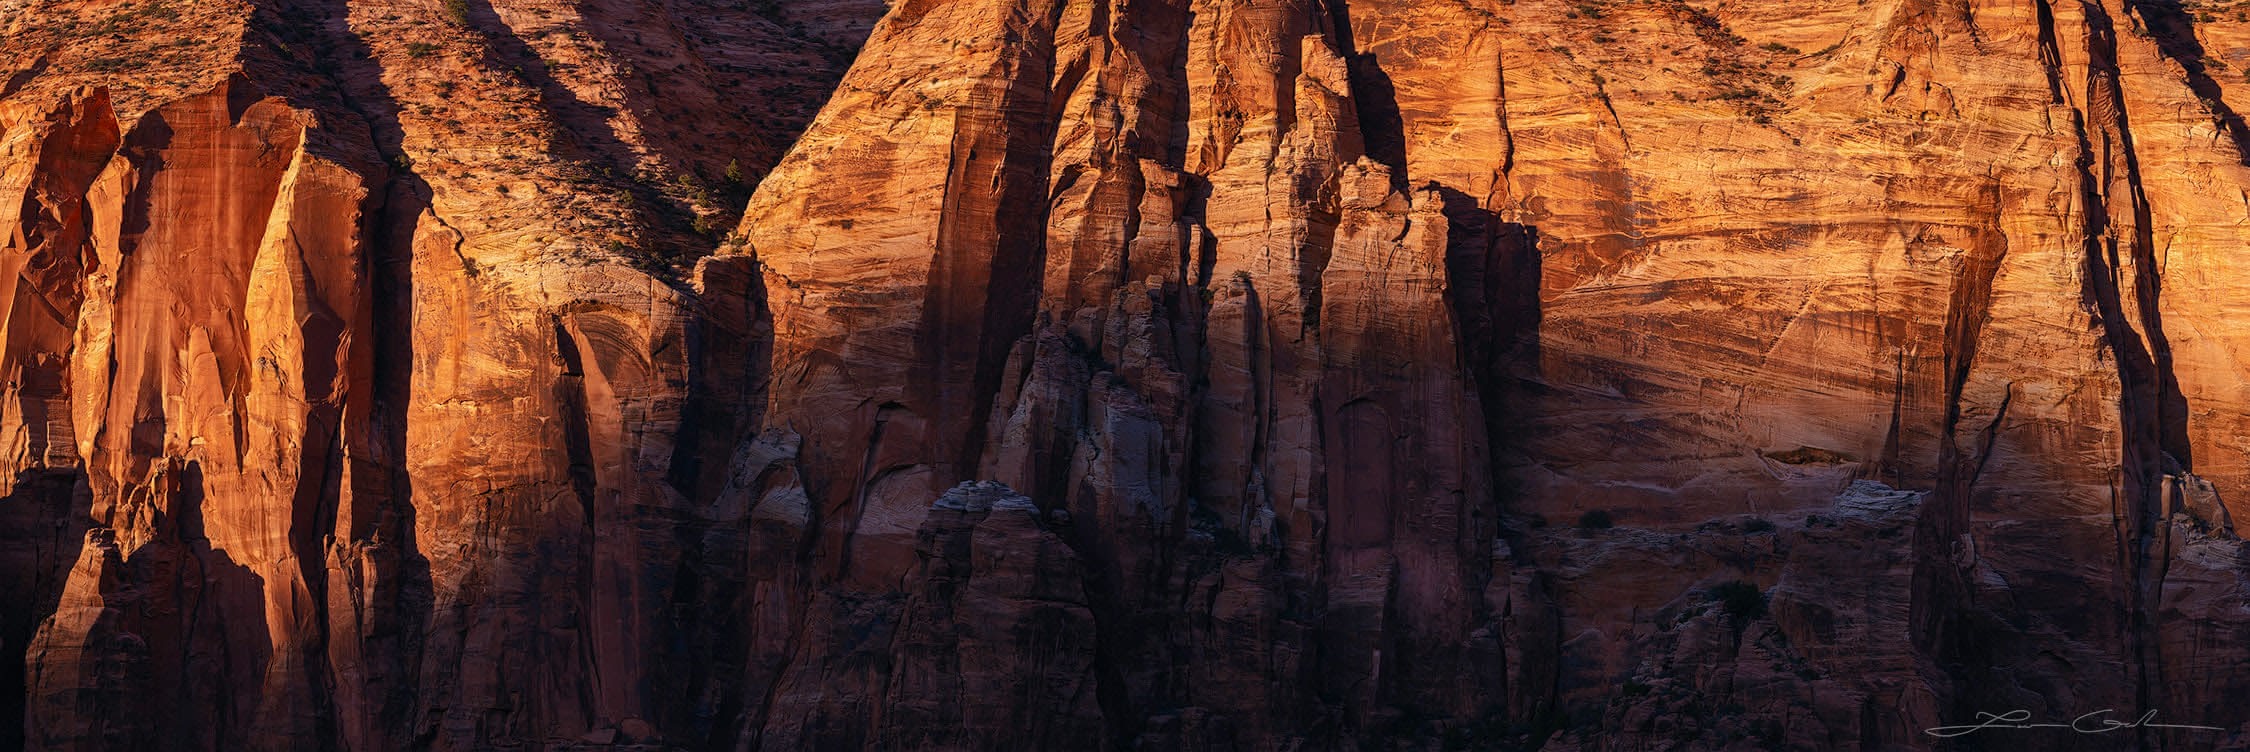 A vertical rock wall panorama of red stone illuminated by the sunset, Zion National Park